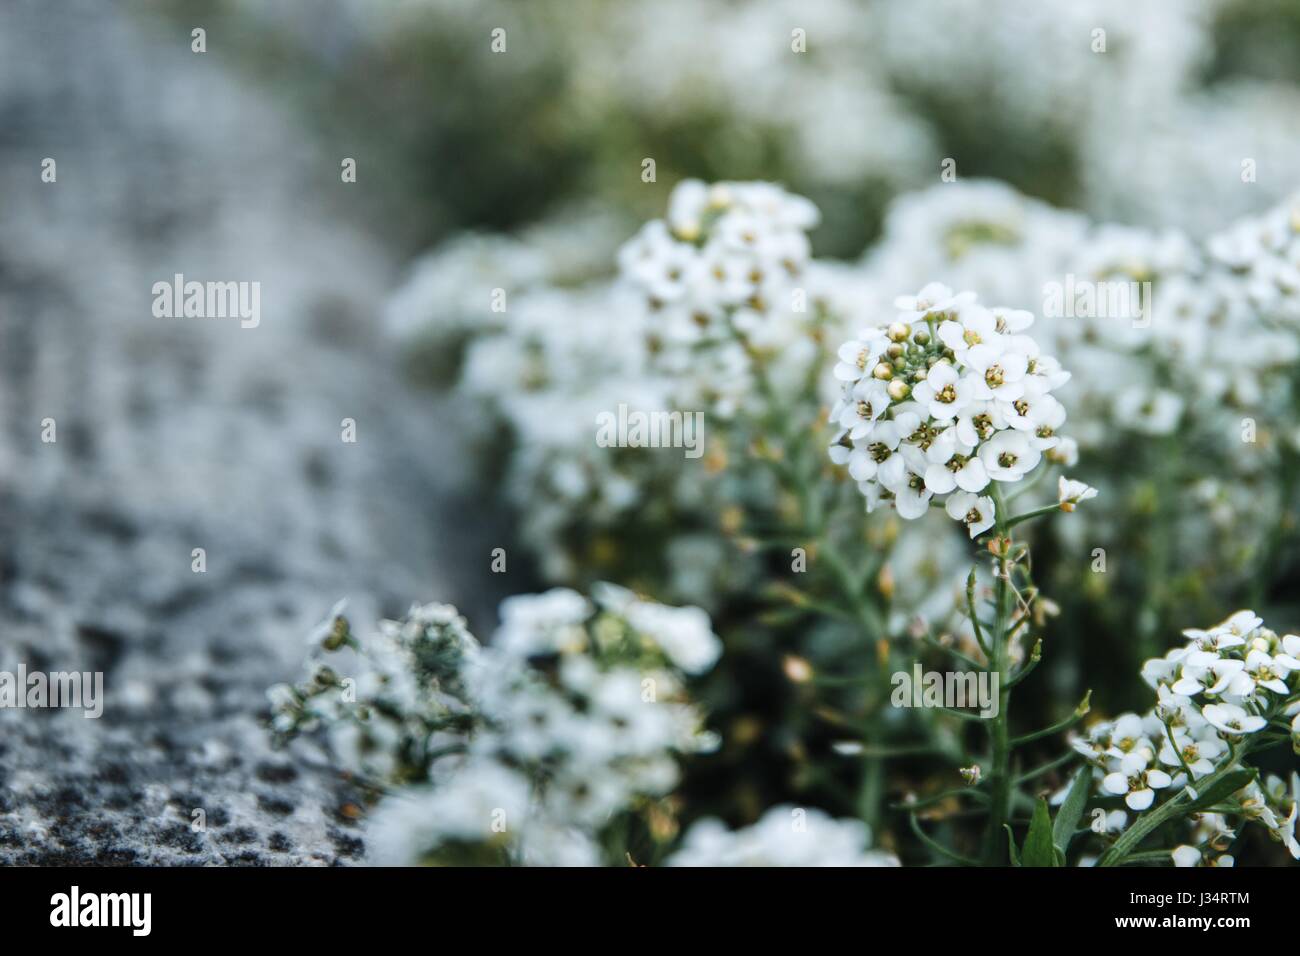 Tiny White Flowers High Resolution Stock Photography and Images - Alamy